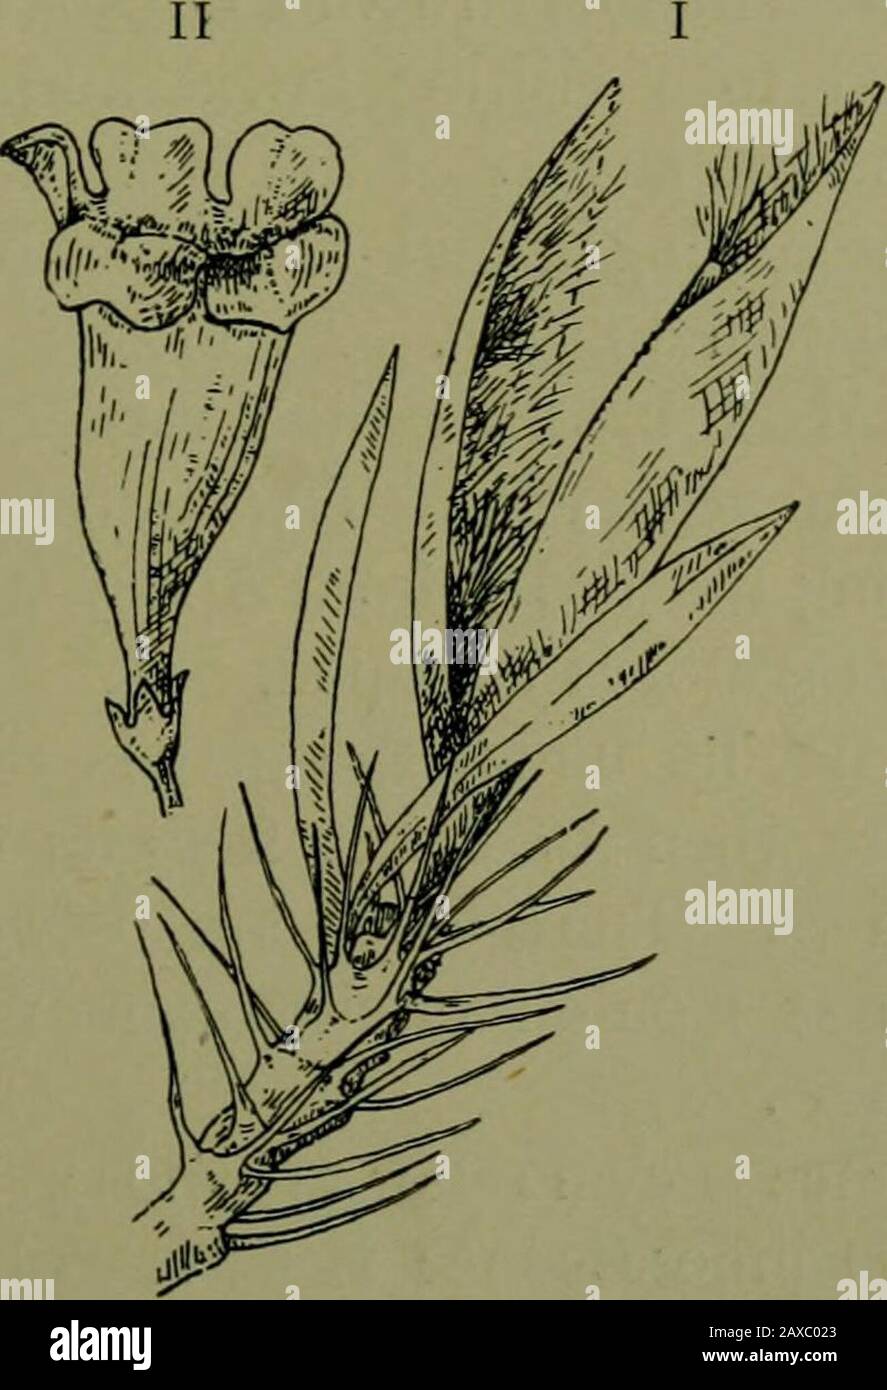 Plants and their ways in South Africa . Fig. 327. — Strophanthus ca-pensis, D.C. {speciosus, R.), anda corolla laid open showingscales at the throat. conniving, tailed. Fruit of lanceolate follicles, many seeded ;seeds hairy at one end.. Fig. -^2.%.—Pachypodium. I. Branch showing spinous stipules and follicleswith hairy seeds. II. Flower. Leaves in spirals, sometimes suppressed, with stipular spines. 348 Plants and their Ways in South Africa Small shrubs with tuberous roots. Flowers white, red, oryellow. Order Asclepiadace/e. Flowers perfect, regular, five parted; sepals imbricate, oddsepal at Stock Photo